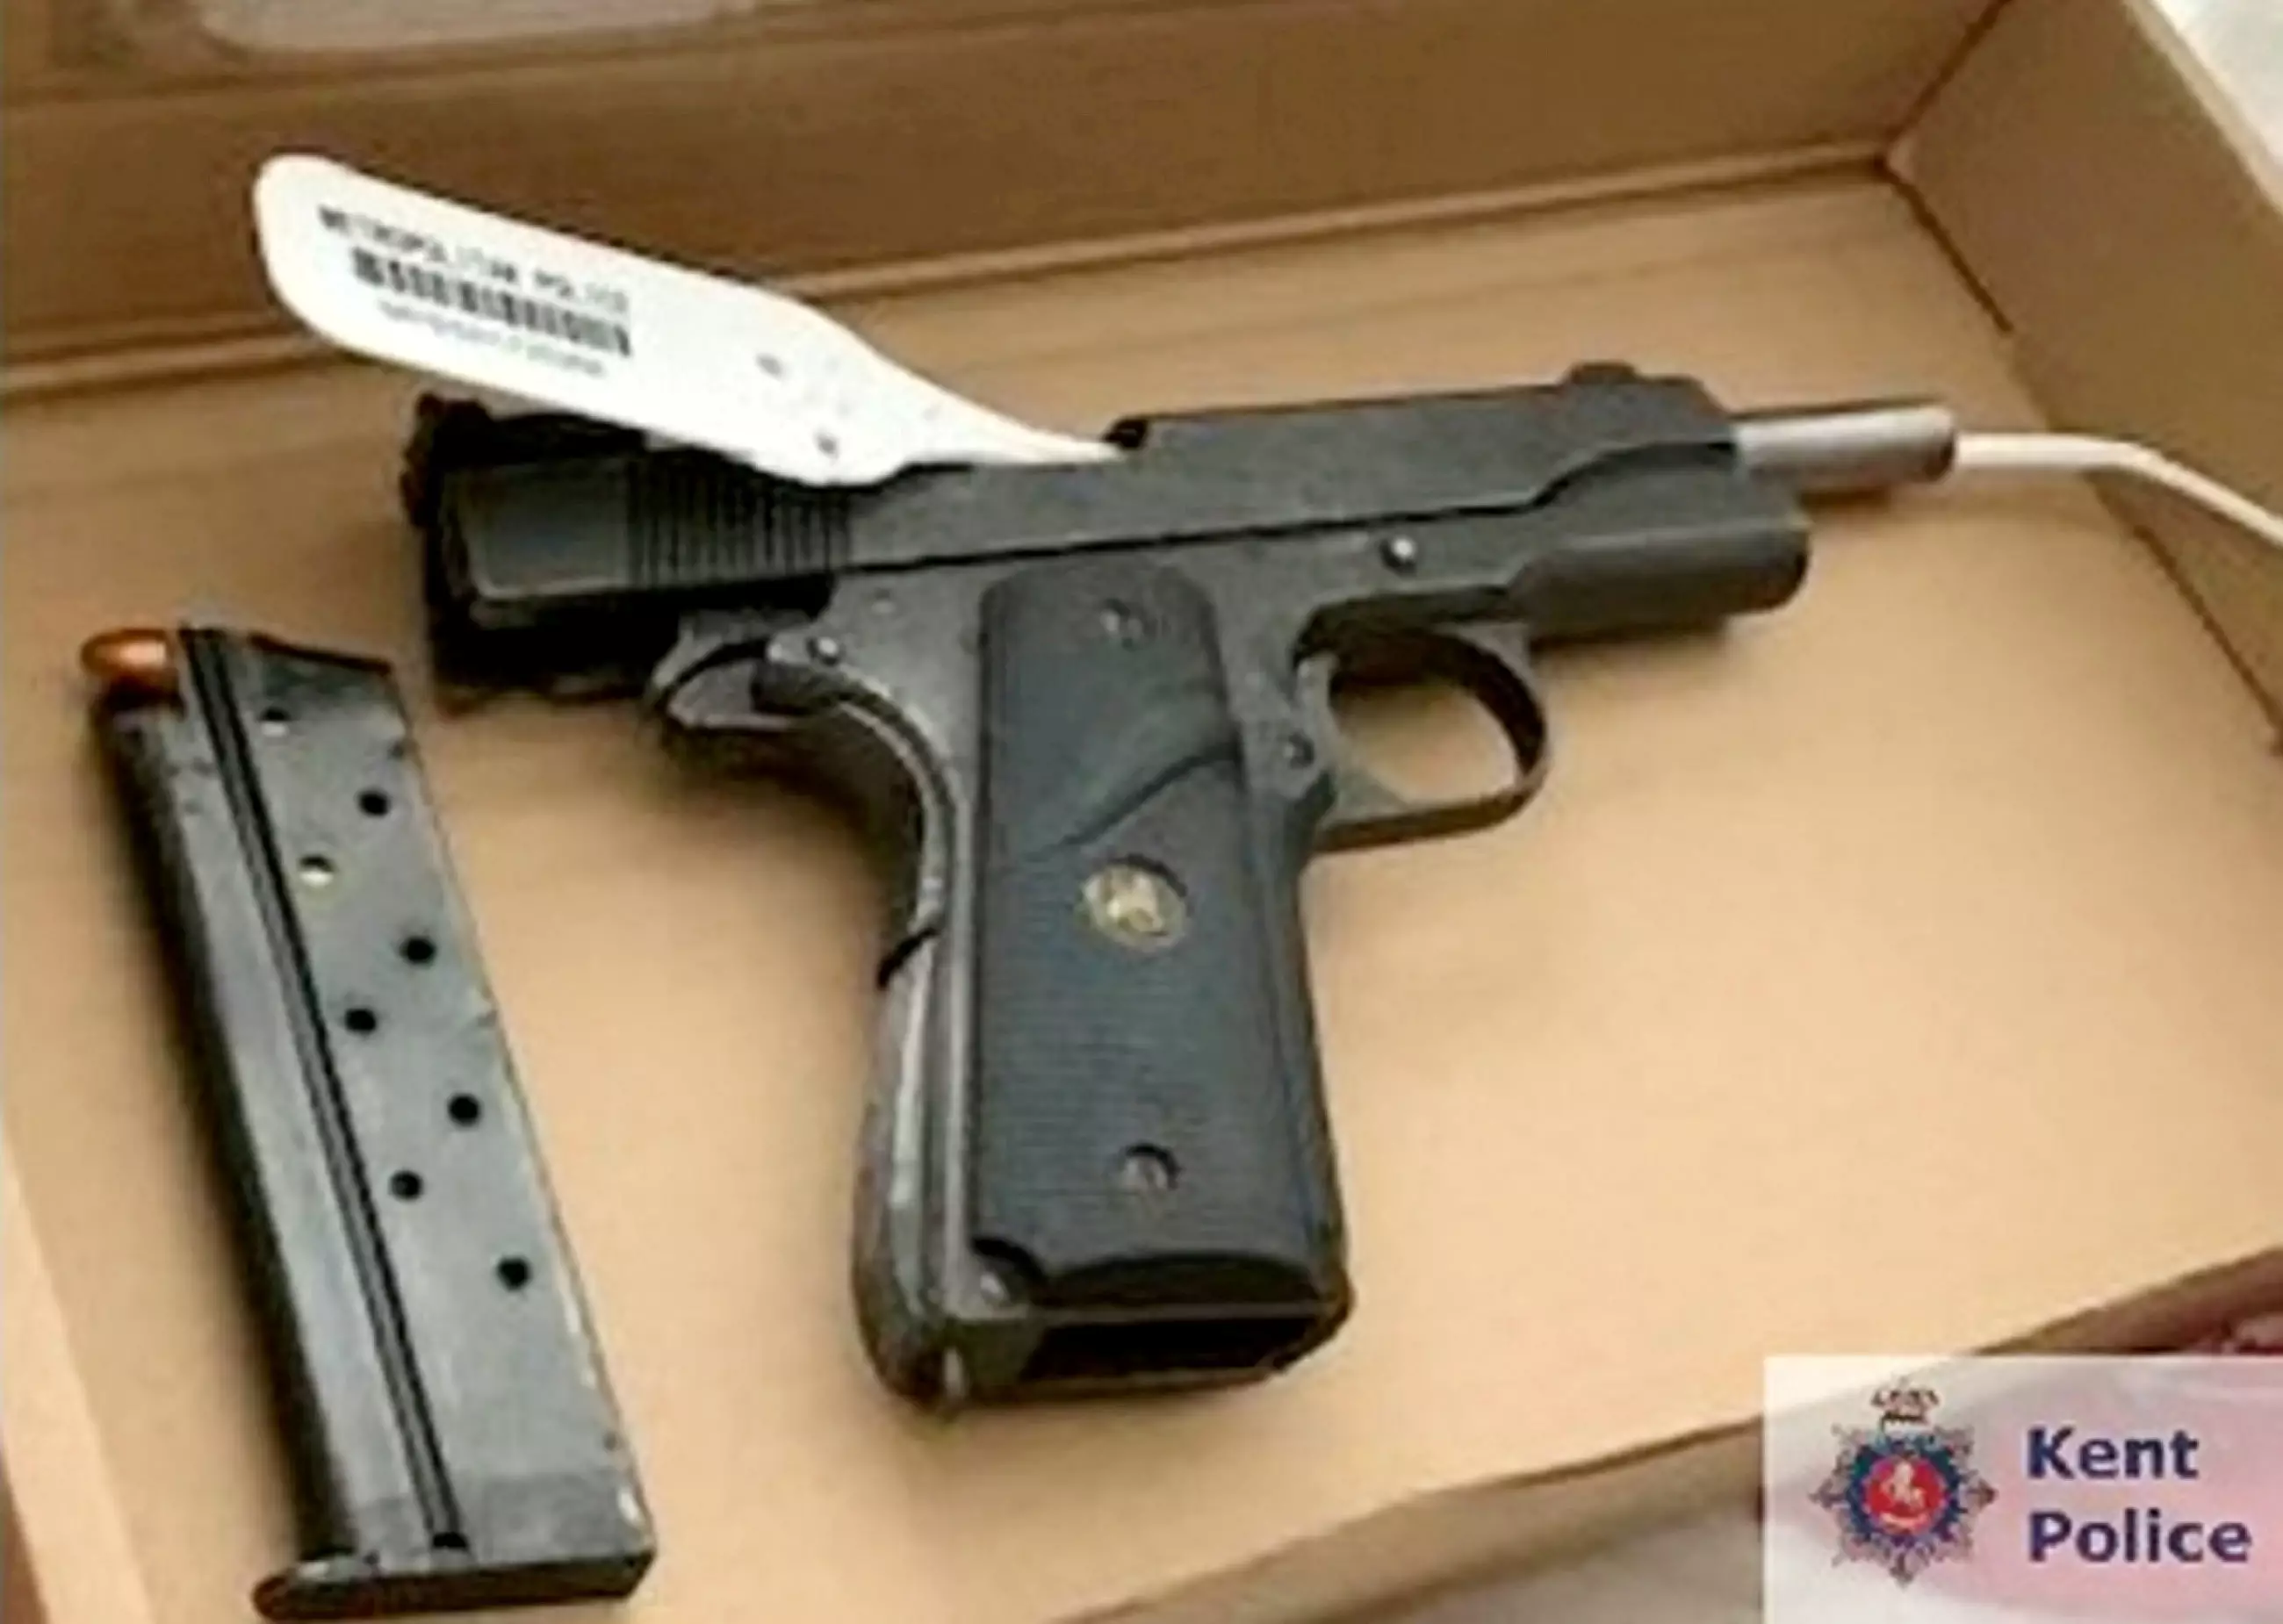 A loaded gun was discovered in his flat.